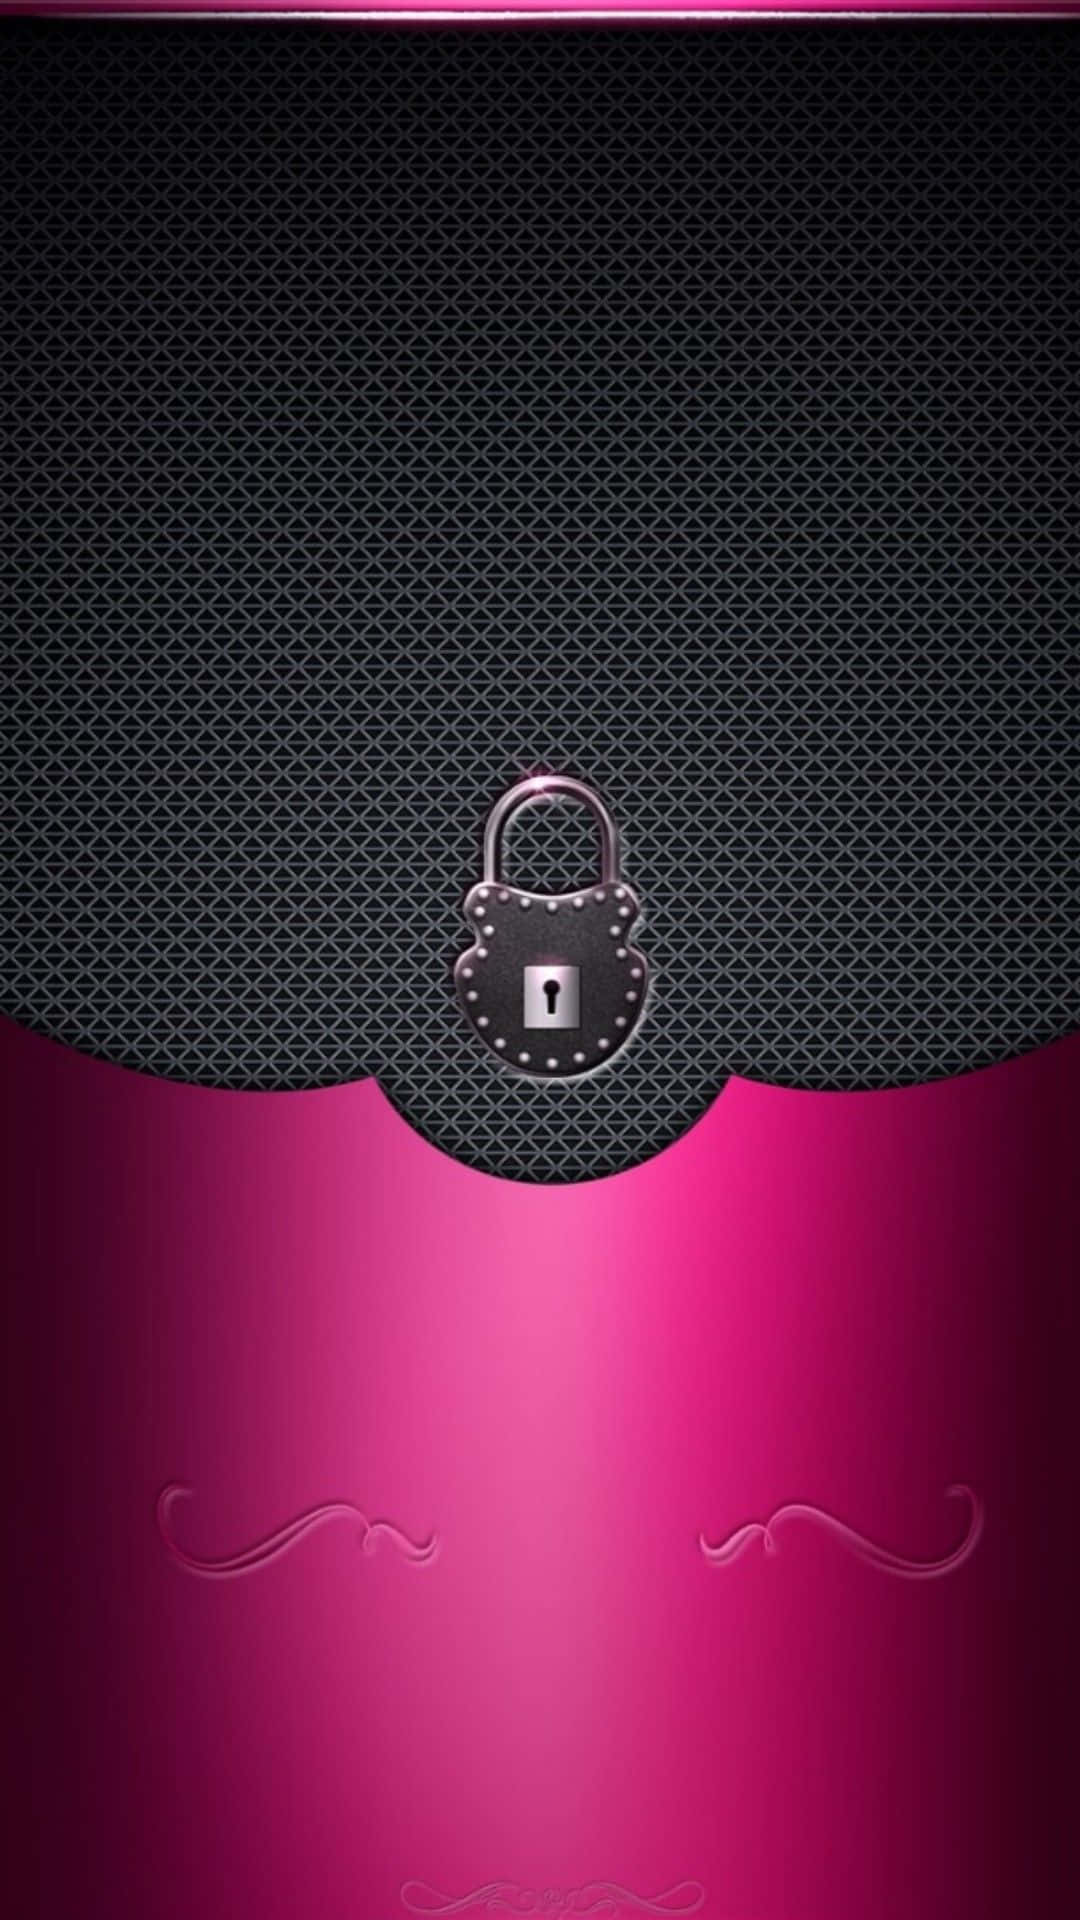 Black And Pink iPhone Lock And Patterns Wallpaper